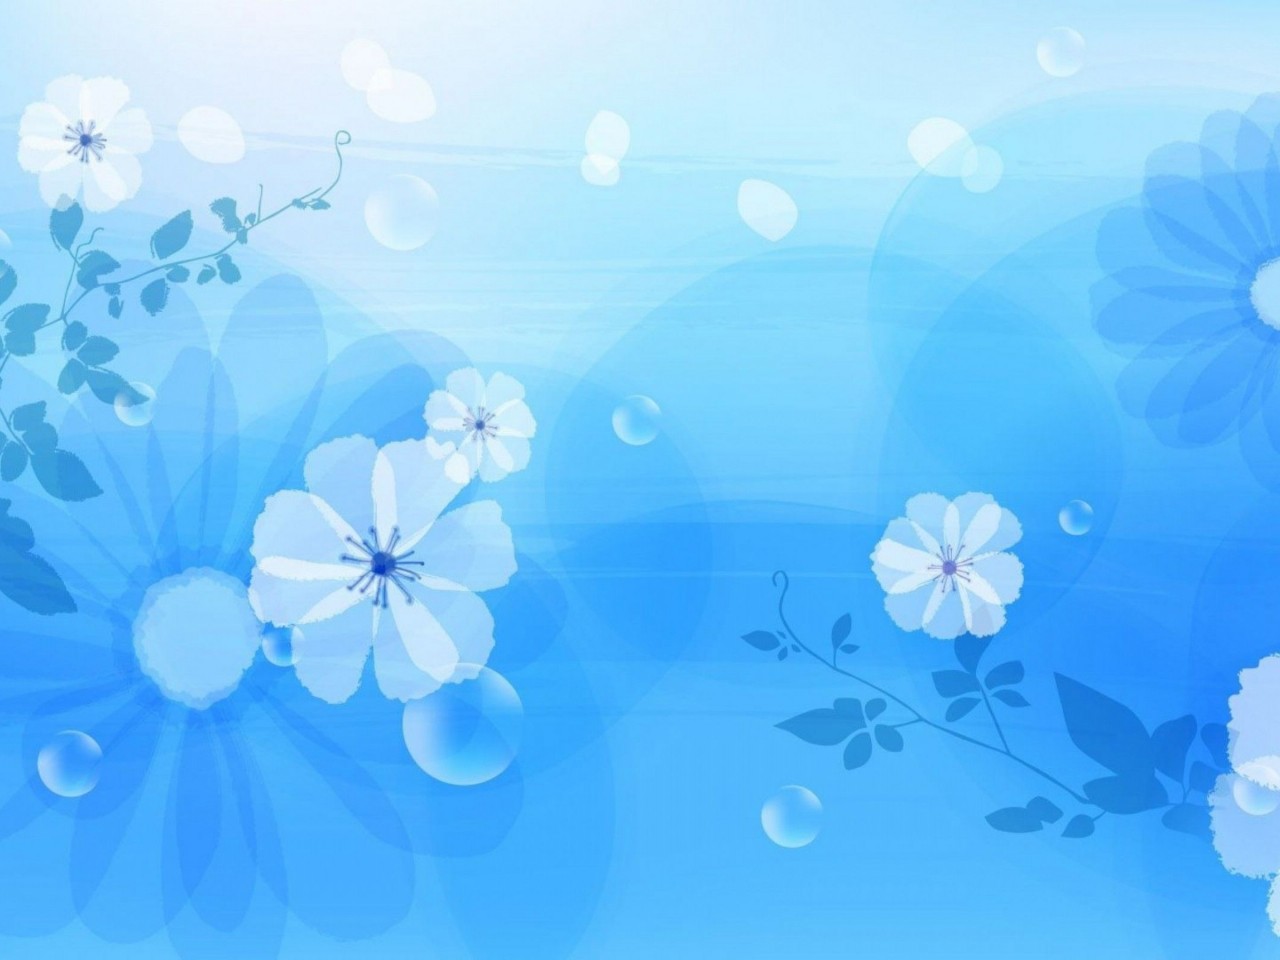 Flower Patterns Free PPT For Your PowerPoint Templates Template